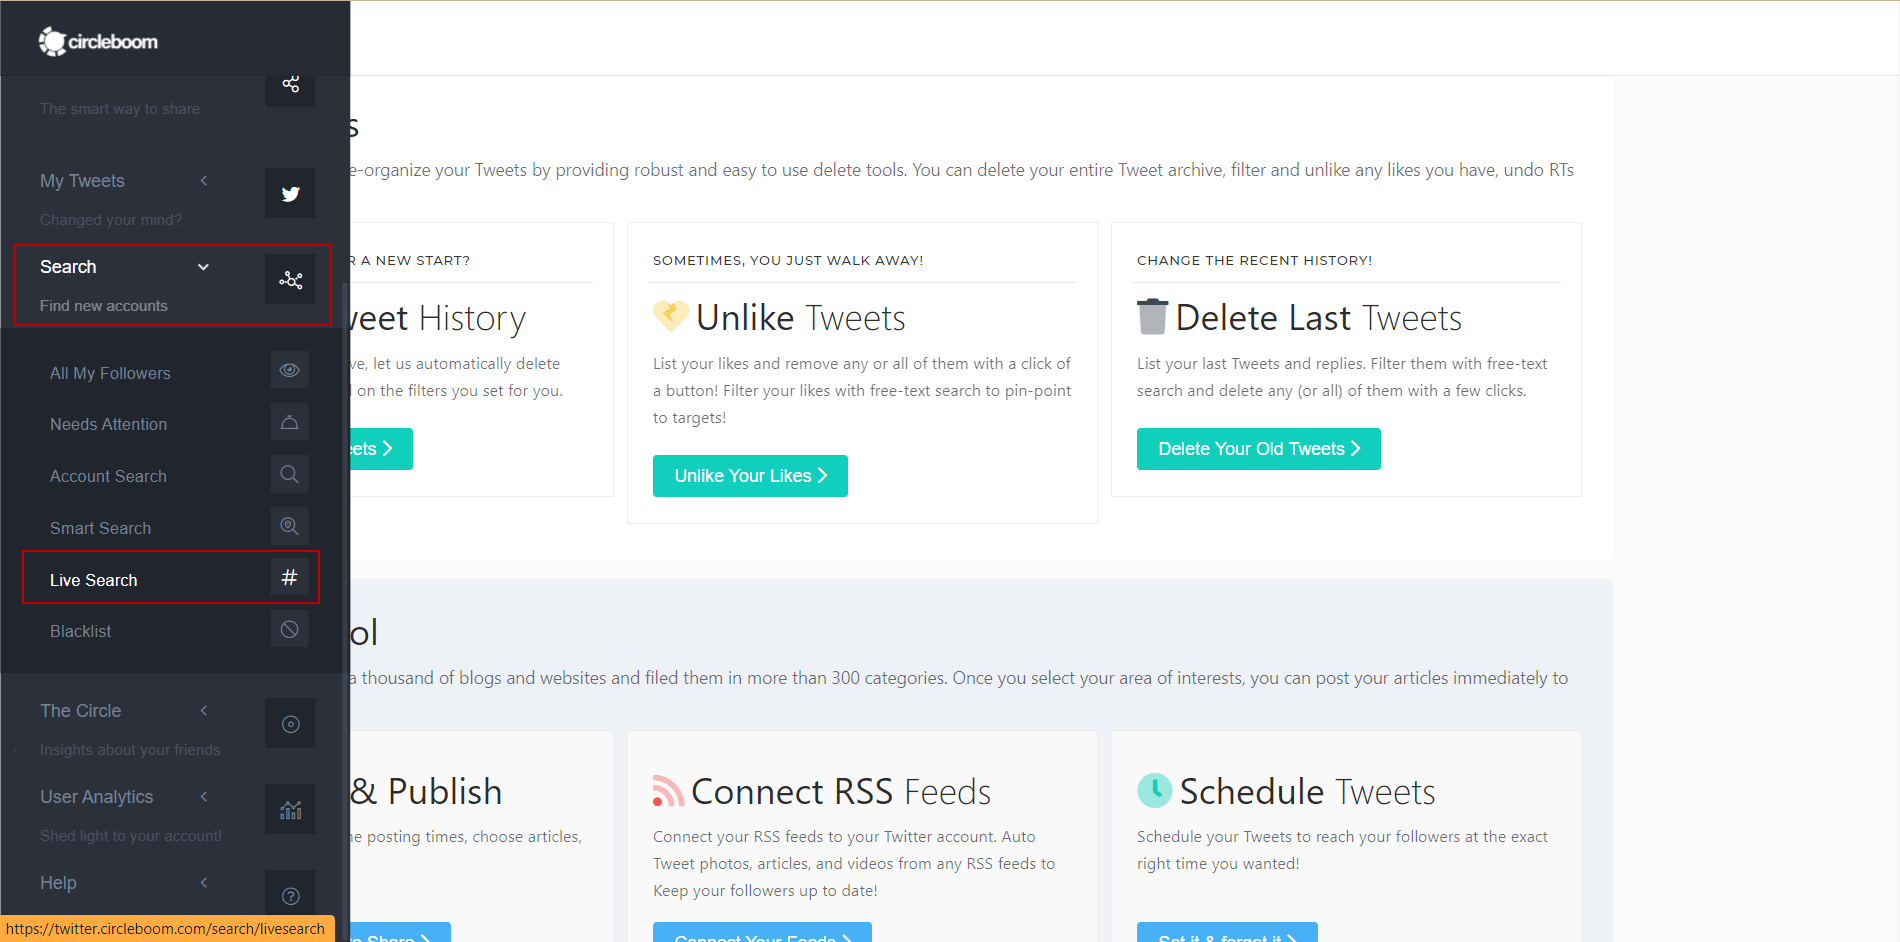 Circleboom Twitter's Live Search Tool both functions as a hashtag tracker and keyword tracker.